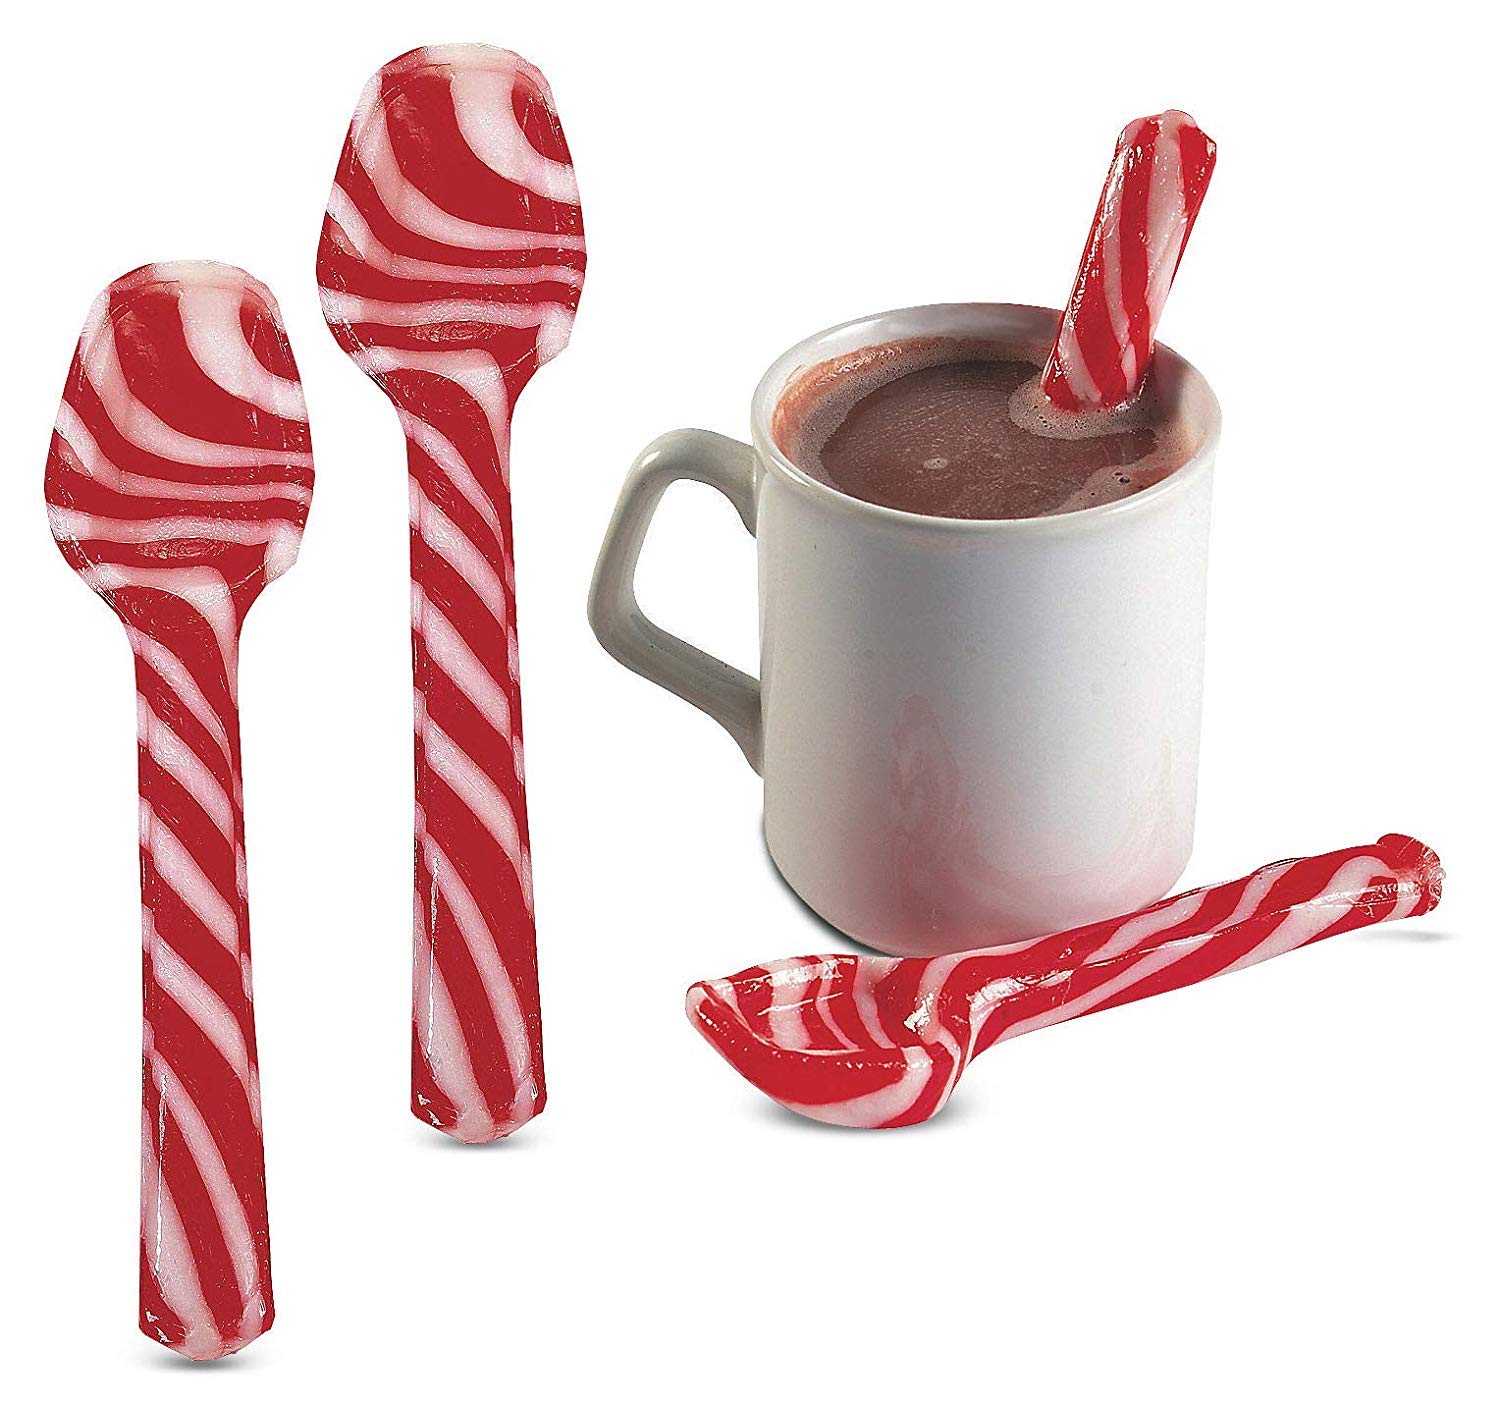  4Es Novelty 24 Peppermint Candy Cane Spoons Individually Wrapped - And 2 Mini Bags Marshmallows